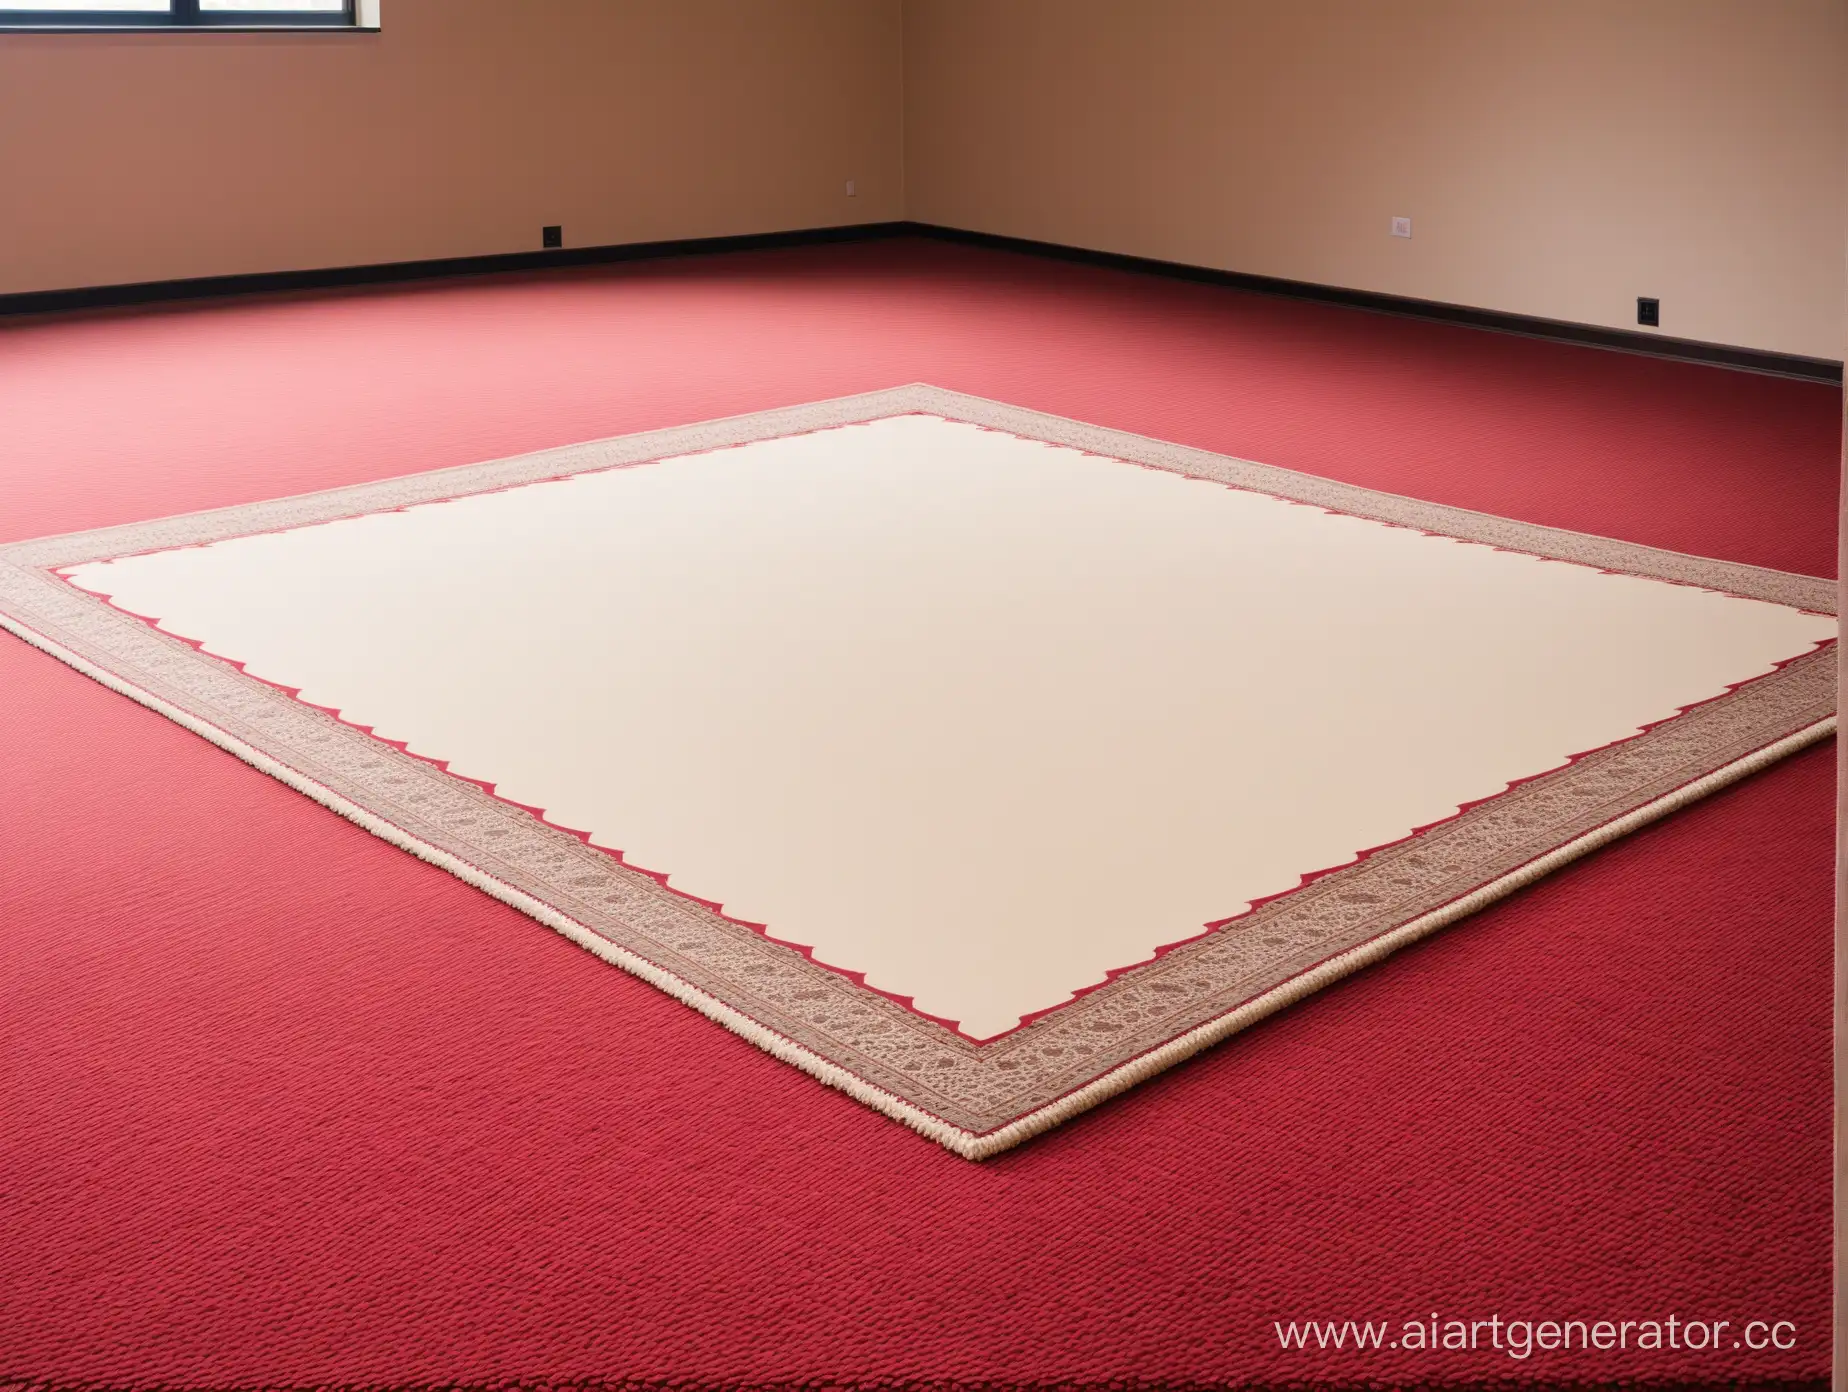 Expansive-Carpet-Covering-Full-Canvas